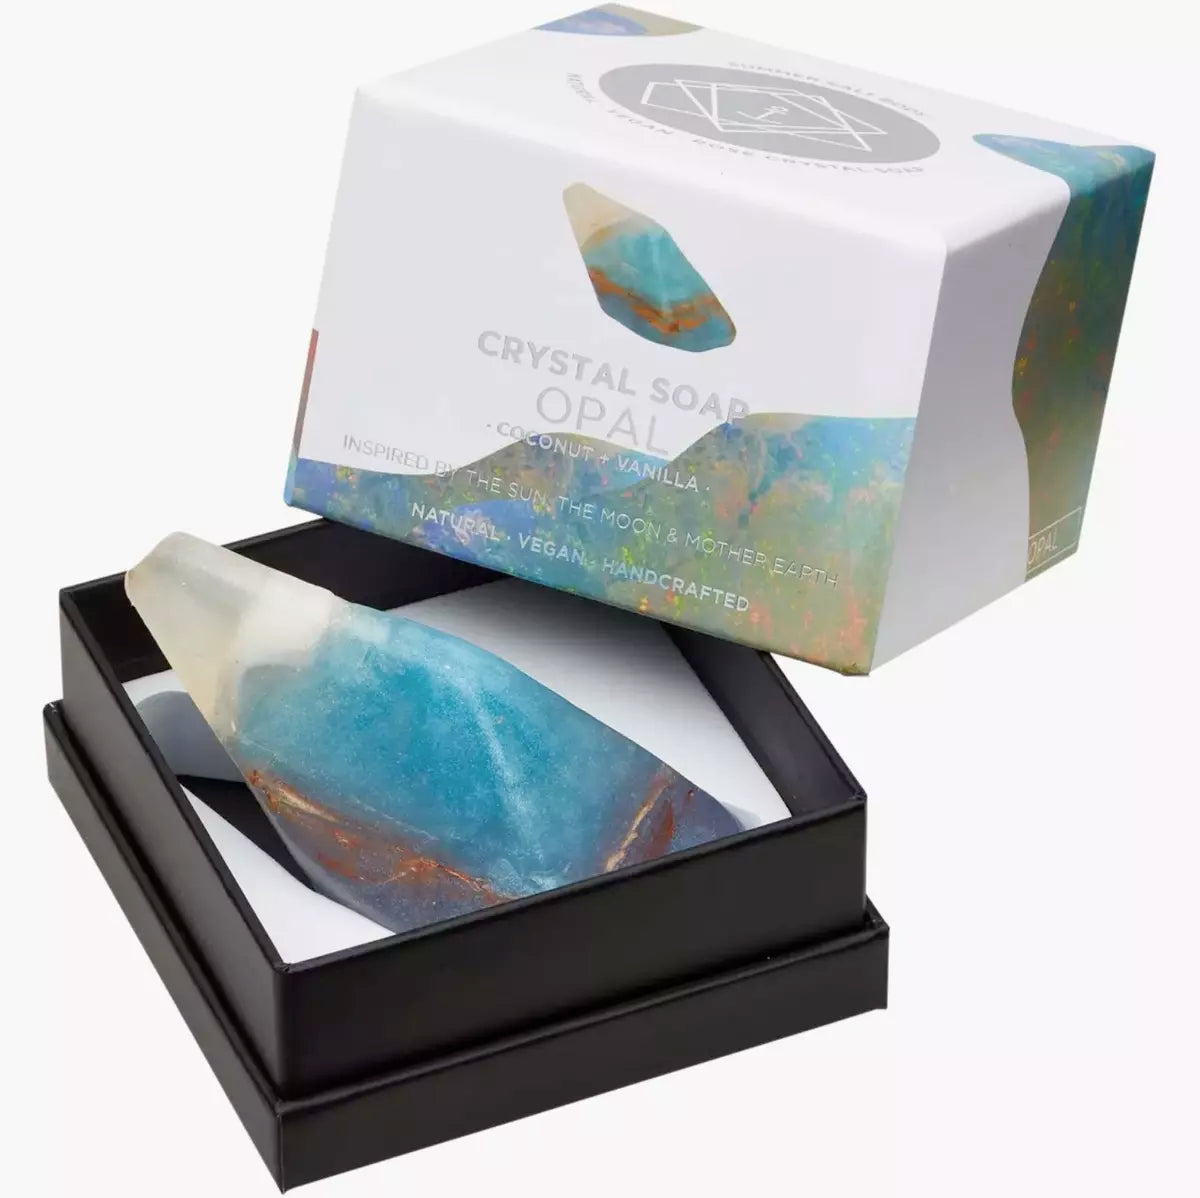 A box with a blue and white Summer Salt Body Crystal Soap - OPAL - Coconut + Vanilla in it, containing a beautiful opal stone.